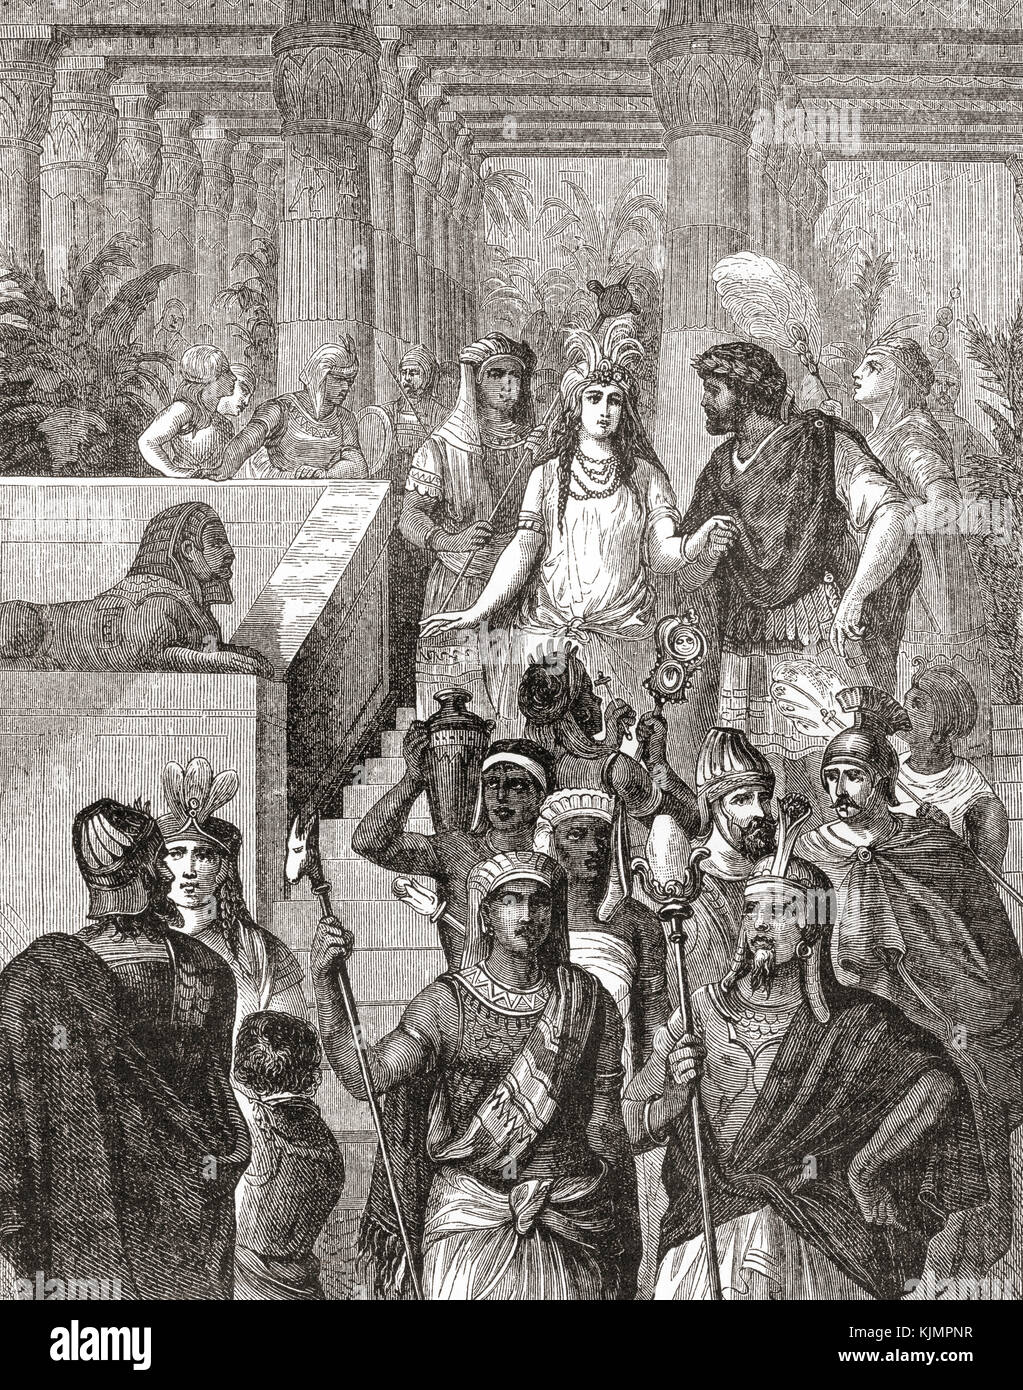 Antony and Cleopatra in Egypt.  Cleopatra VII Philopator, 69 - 30 BC, aka Cleopatra.  Last active ruler of the Ptolemaic Kingdom of Egypt.  Marcus Antonius, 83 - 30 BC, aka Mark or Marc Antony.  Roman politician and general.  From Ward and Lock's Illustrated History of the World, published c.1882. Stock Photo